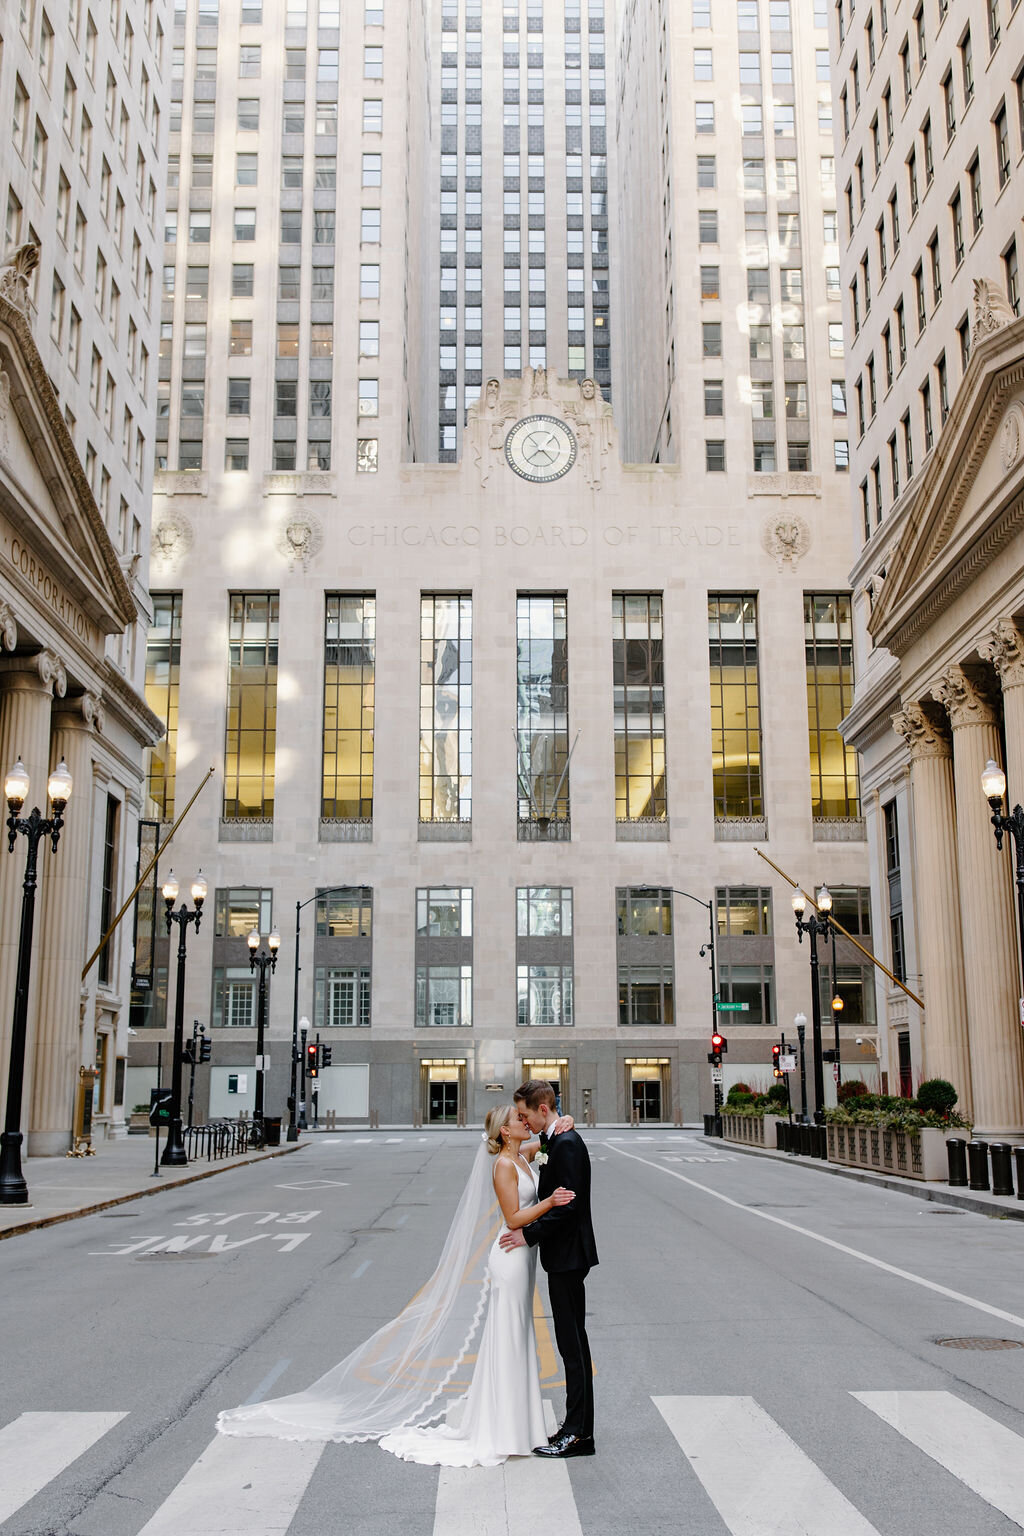 Bride and groom kiss on street in downtown Chicago